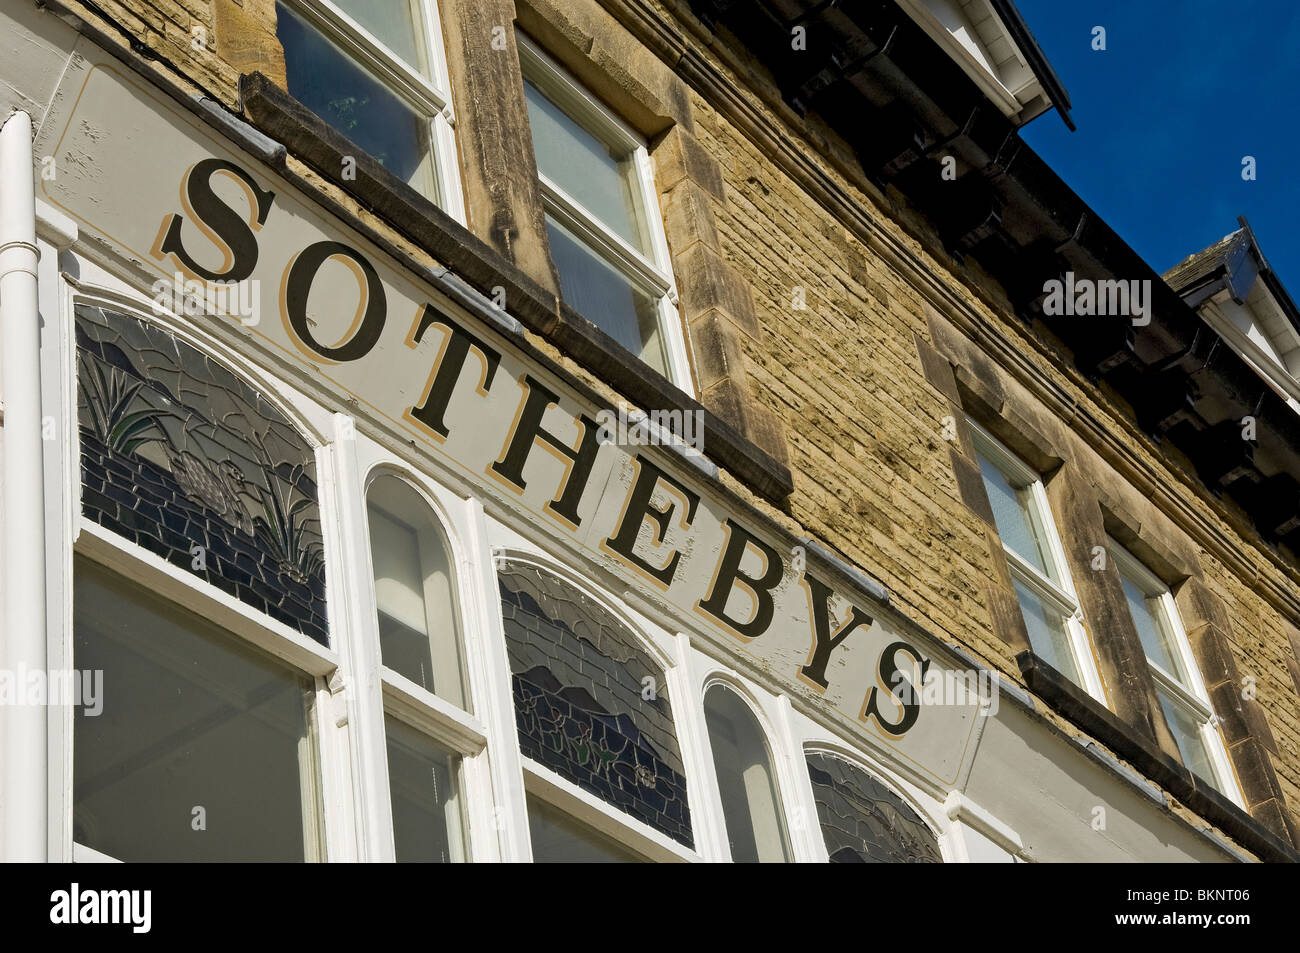 Close up of sign above the former Sotheby's auctioneer shop in Harrogate North Yorkshire England UK United Kingdom GB Great Britain Stock Photo